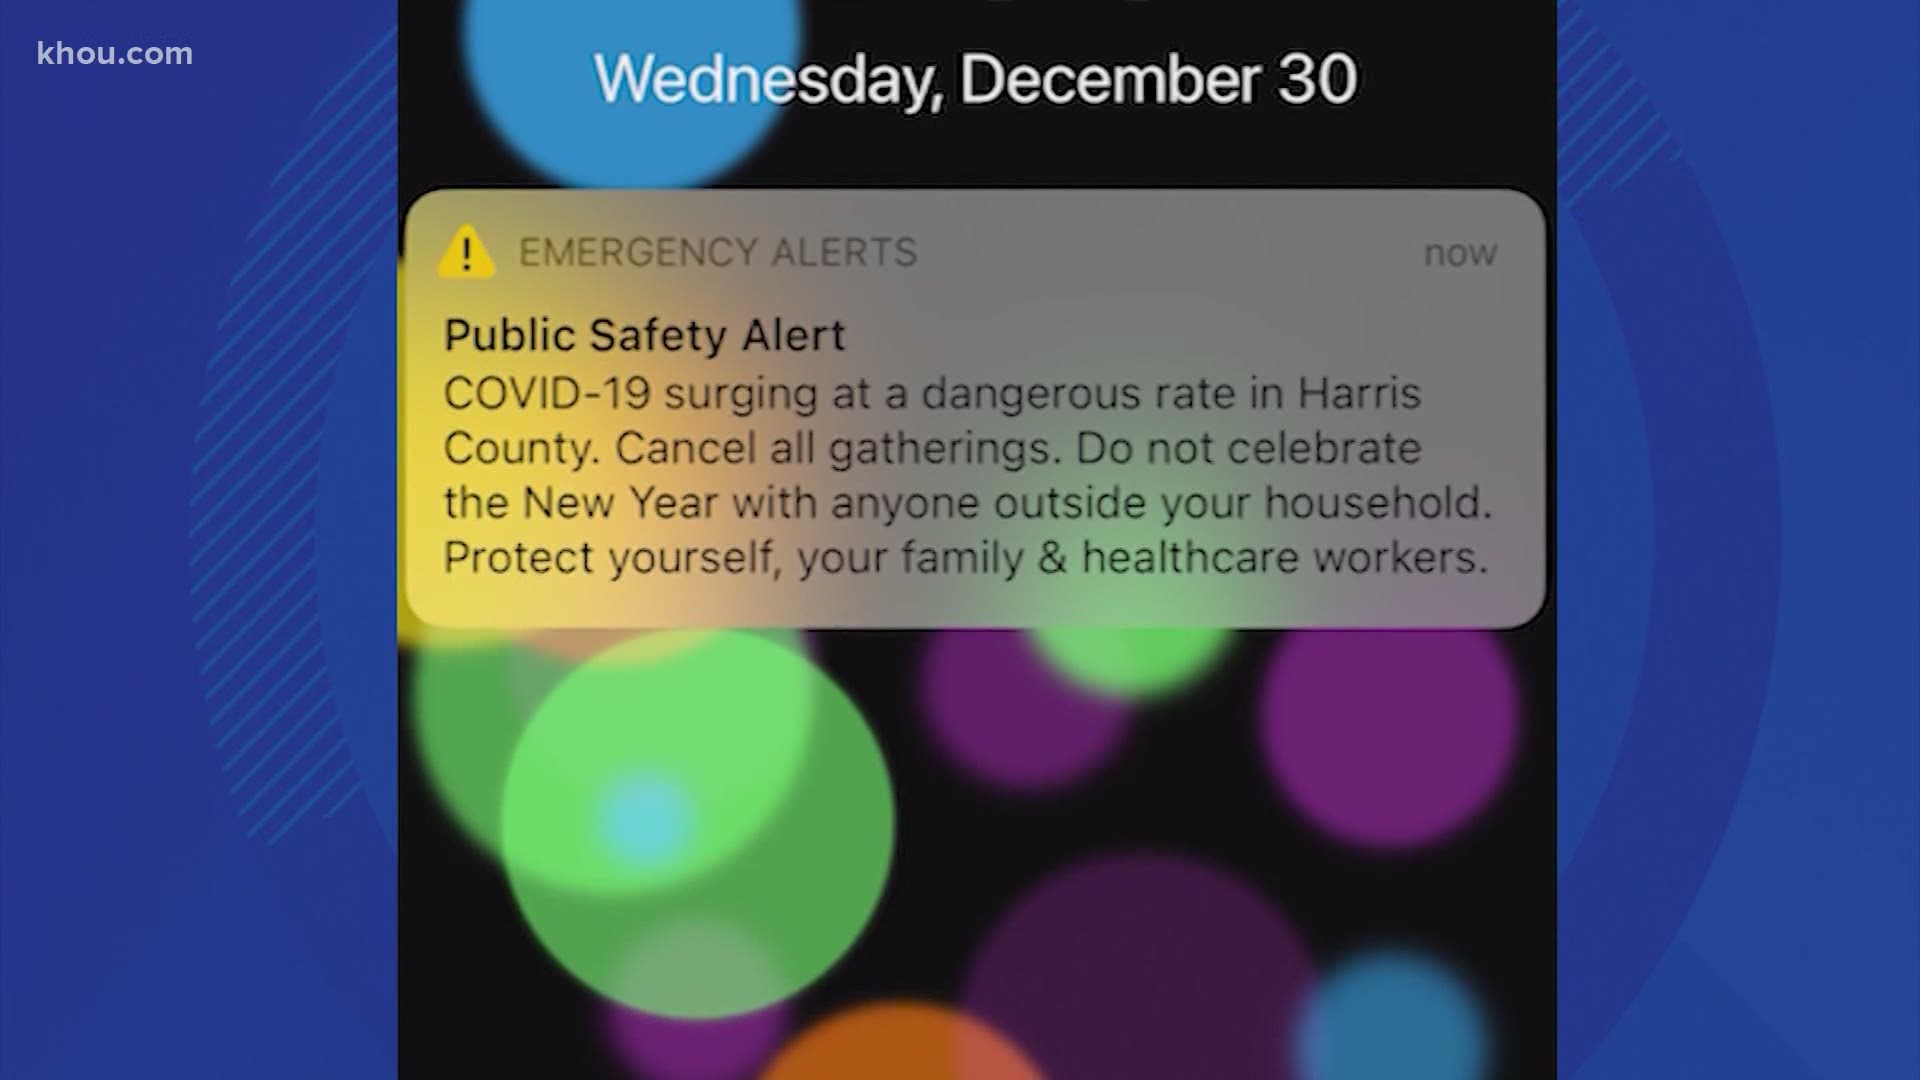 Harris County issued a public safety alert Wednesday afternoon telling residents not to celebrate the New Year’s holiday with anyone outside of their household.